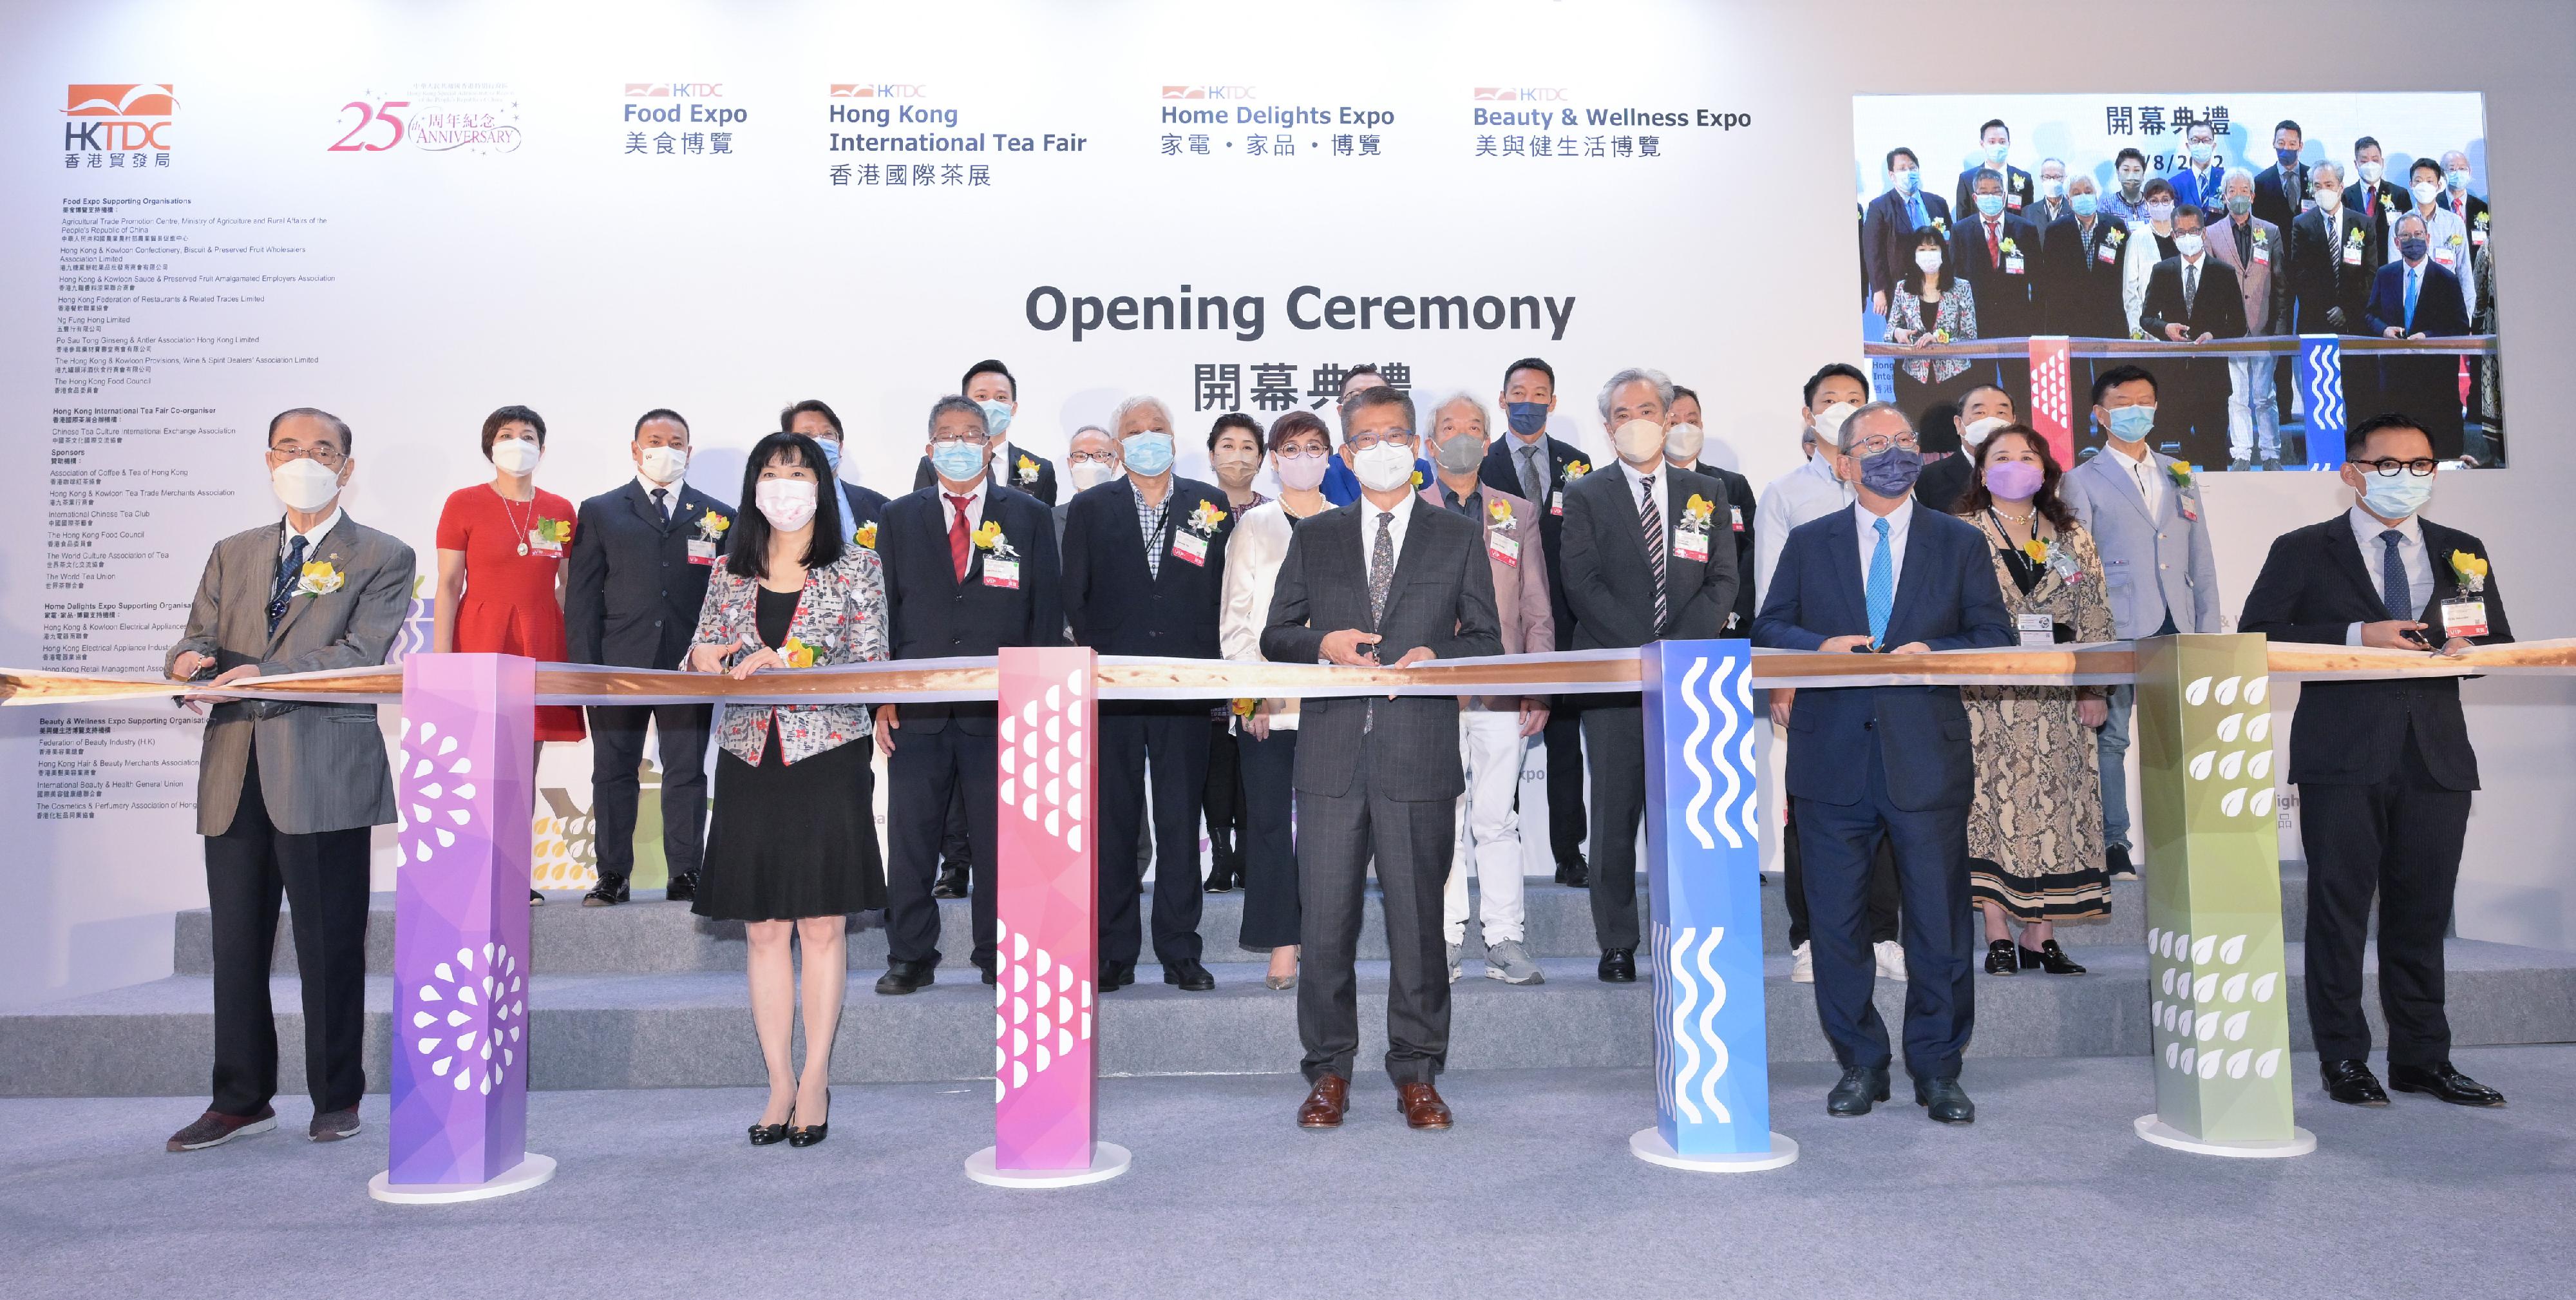 The Financial Secretary, Mr Paul Chan, attended the Joint Opening Ceremony of the Hong Kong Trade Development Council (HKTDC) Food Expo, Hong Kong International Tea Fair, Home Delights Expo and Beauty & Wellness Expo today (August 11). Photo shows Mr Chan (front row, centre); the Chairman of the HKTDC, Dr Peter Lam (front row, second right); the Executive Director of the HKTDC, Ms Margaret Fong (front row, second left); and other guests officiating at the ceremony.